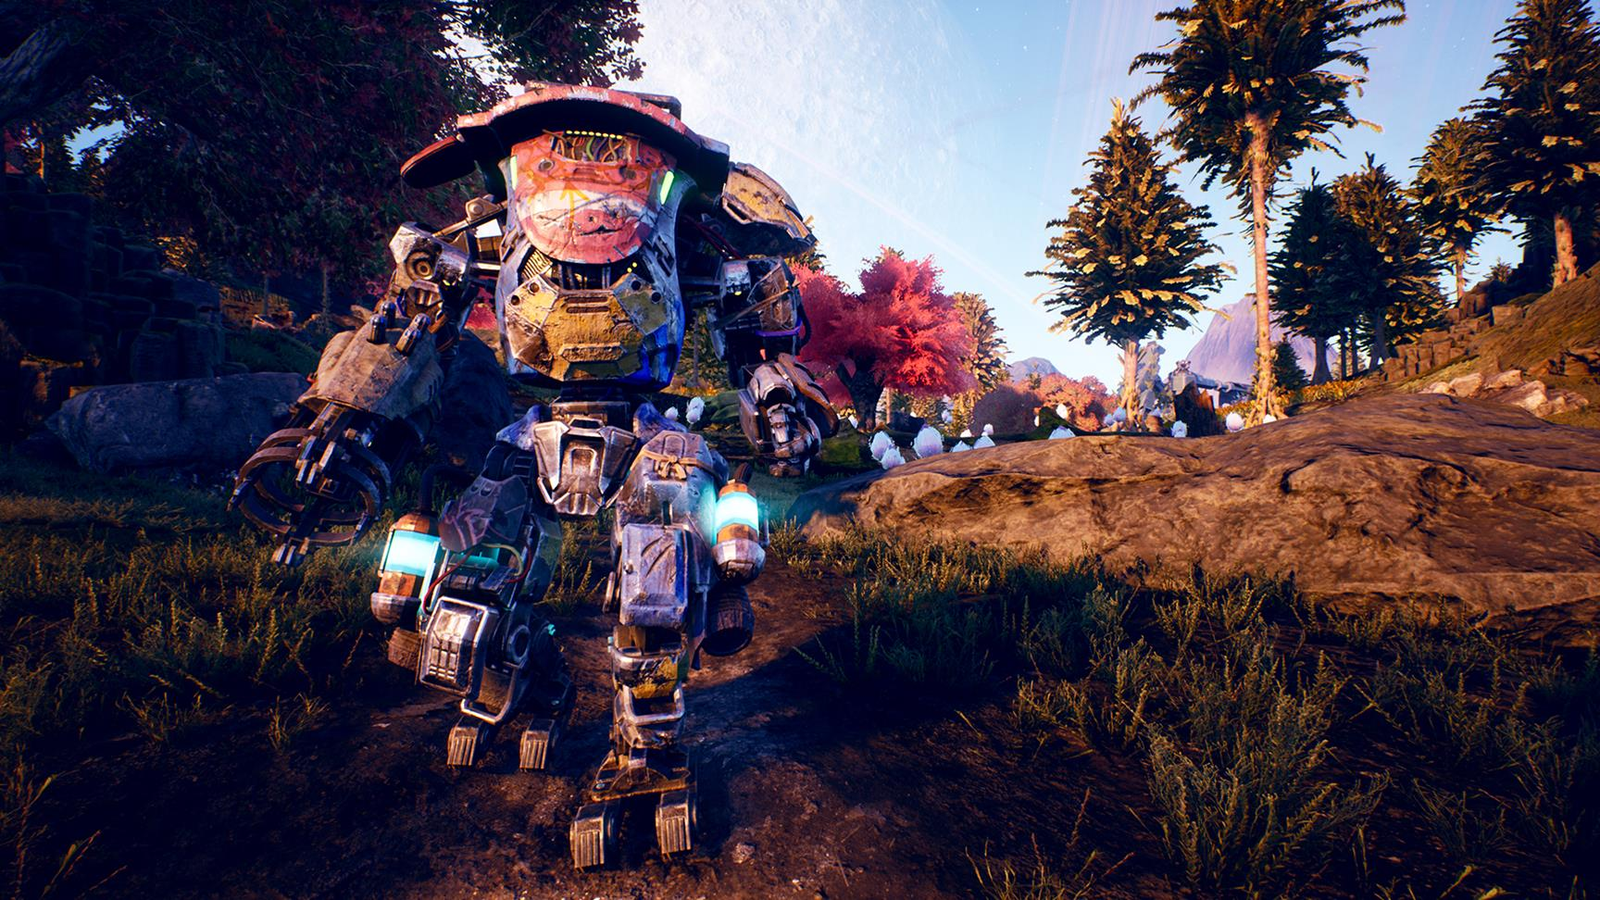 The Outer Worlds review - RPG comfort food that never stretches